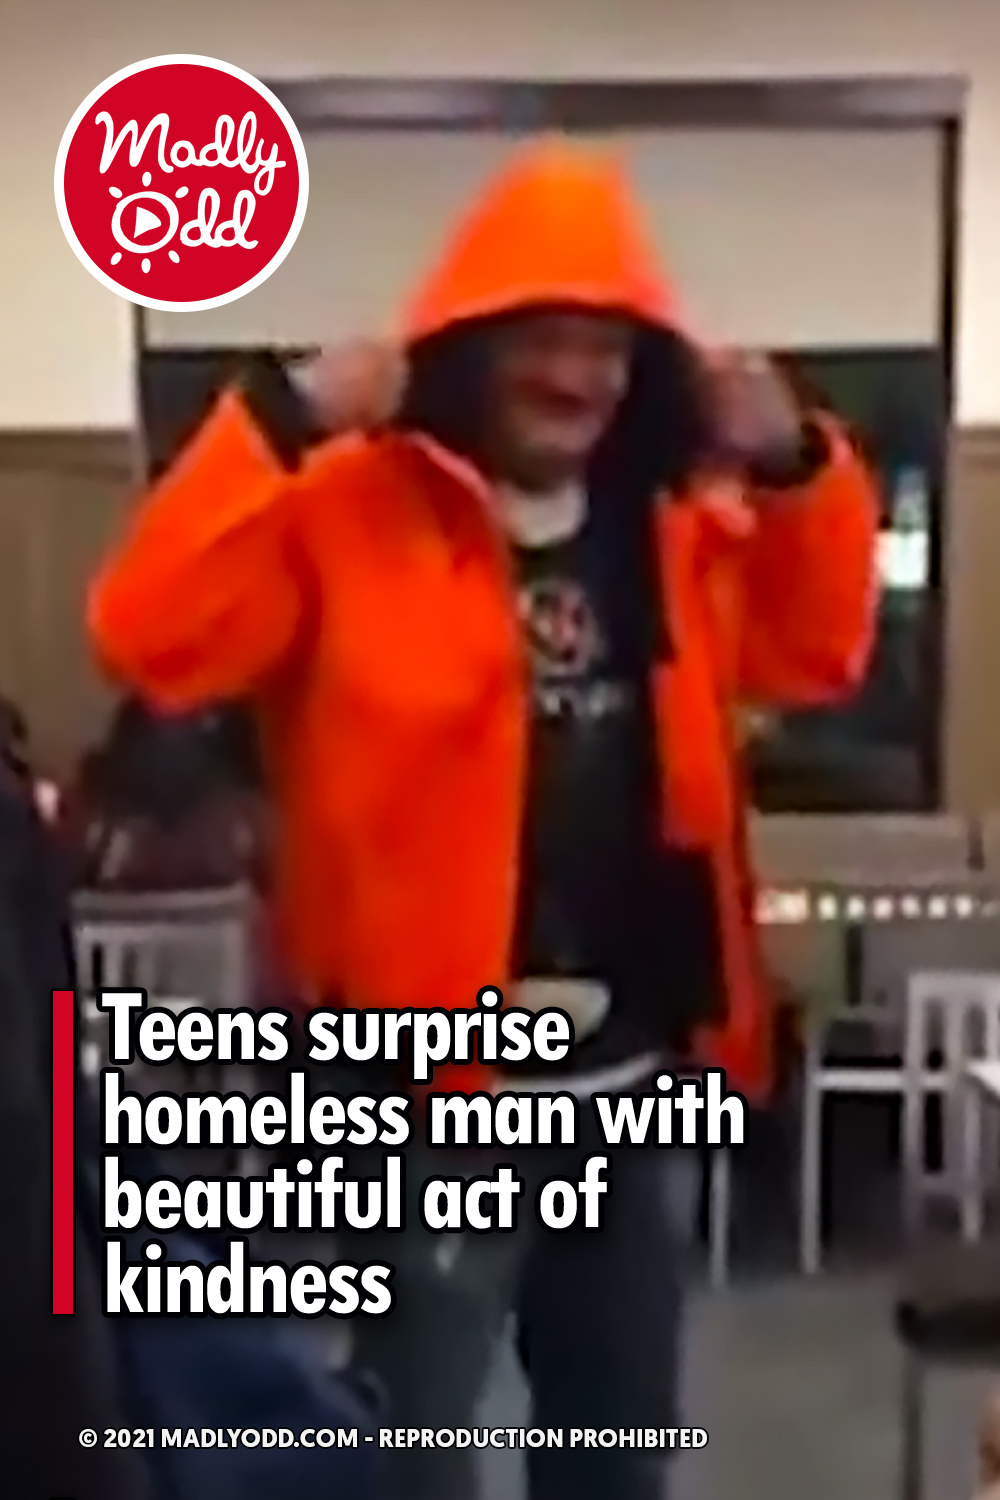 Teens surprise homeless man with beautiful act of kindness